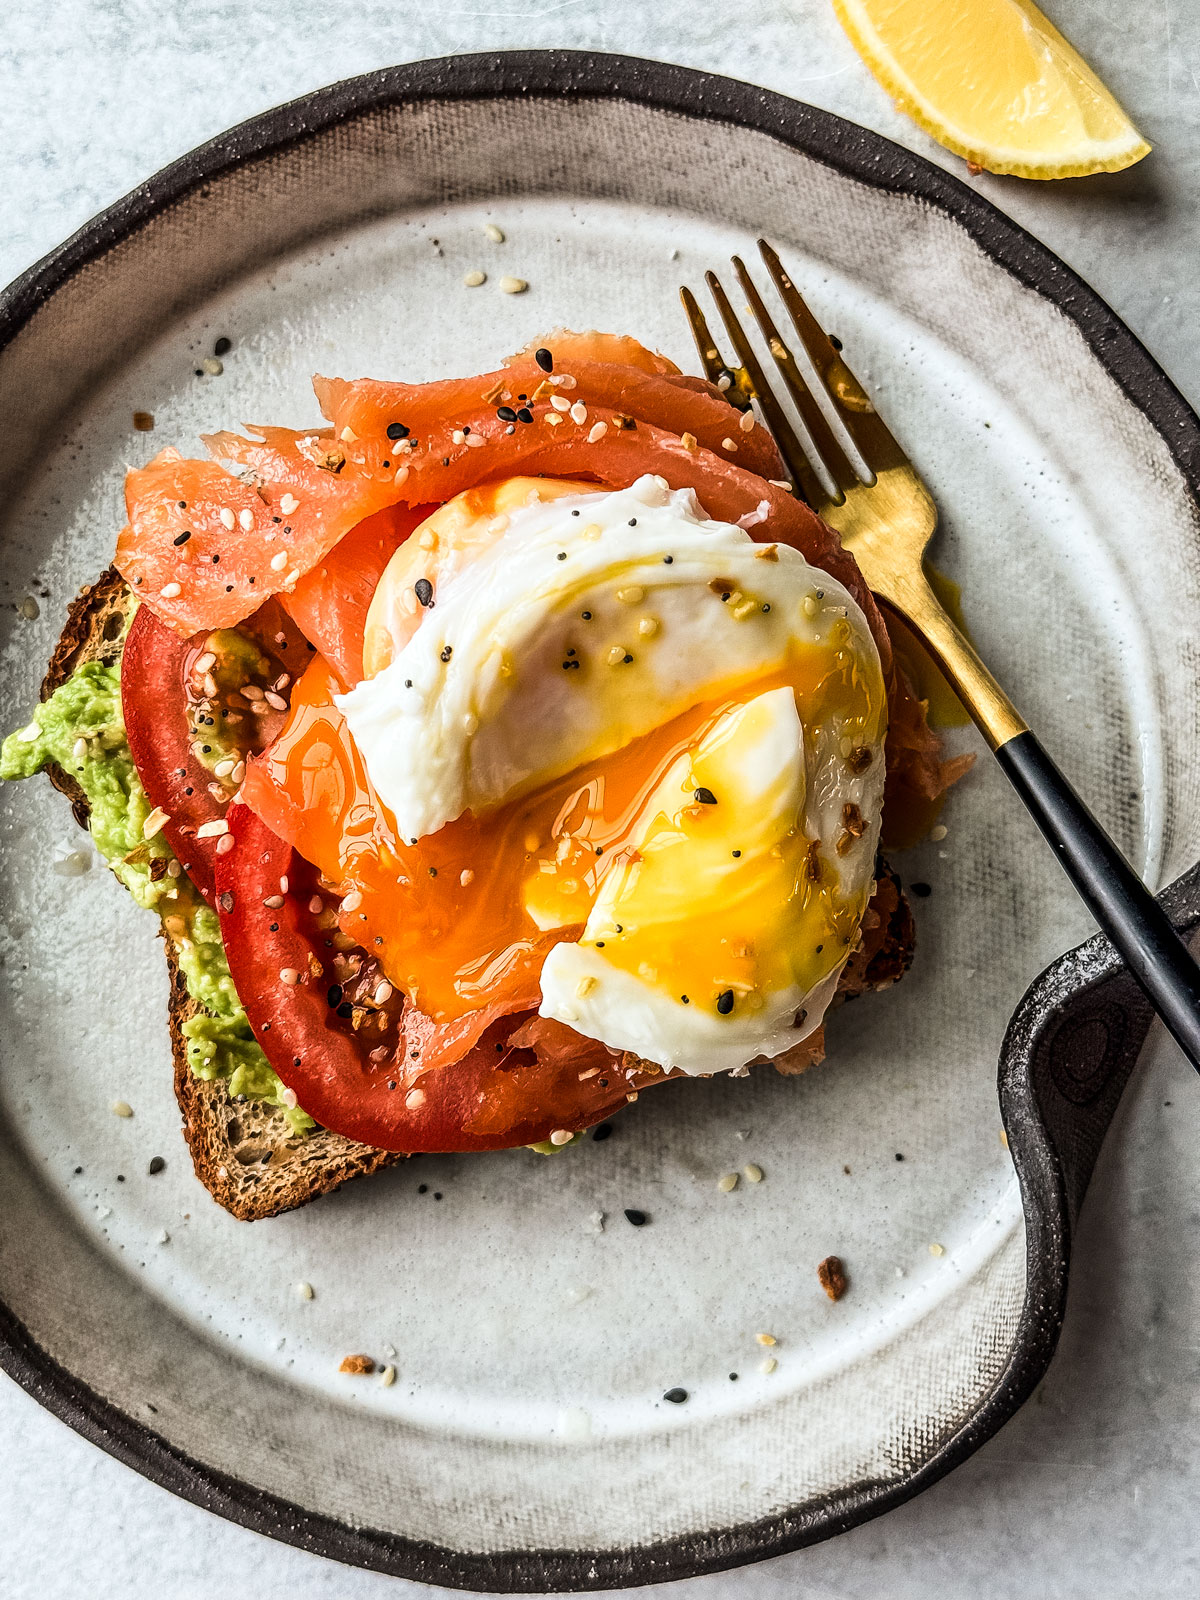 Toast smothered in avocado and topped with tomato and a broken poached egg.